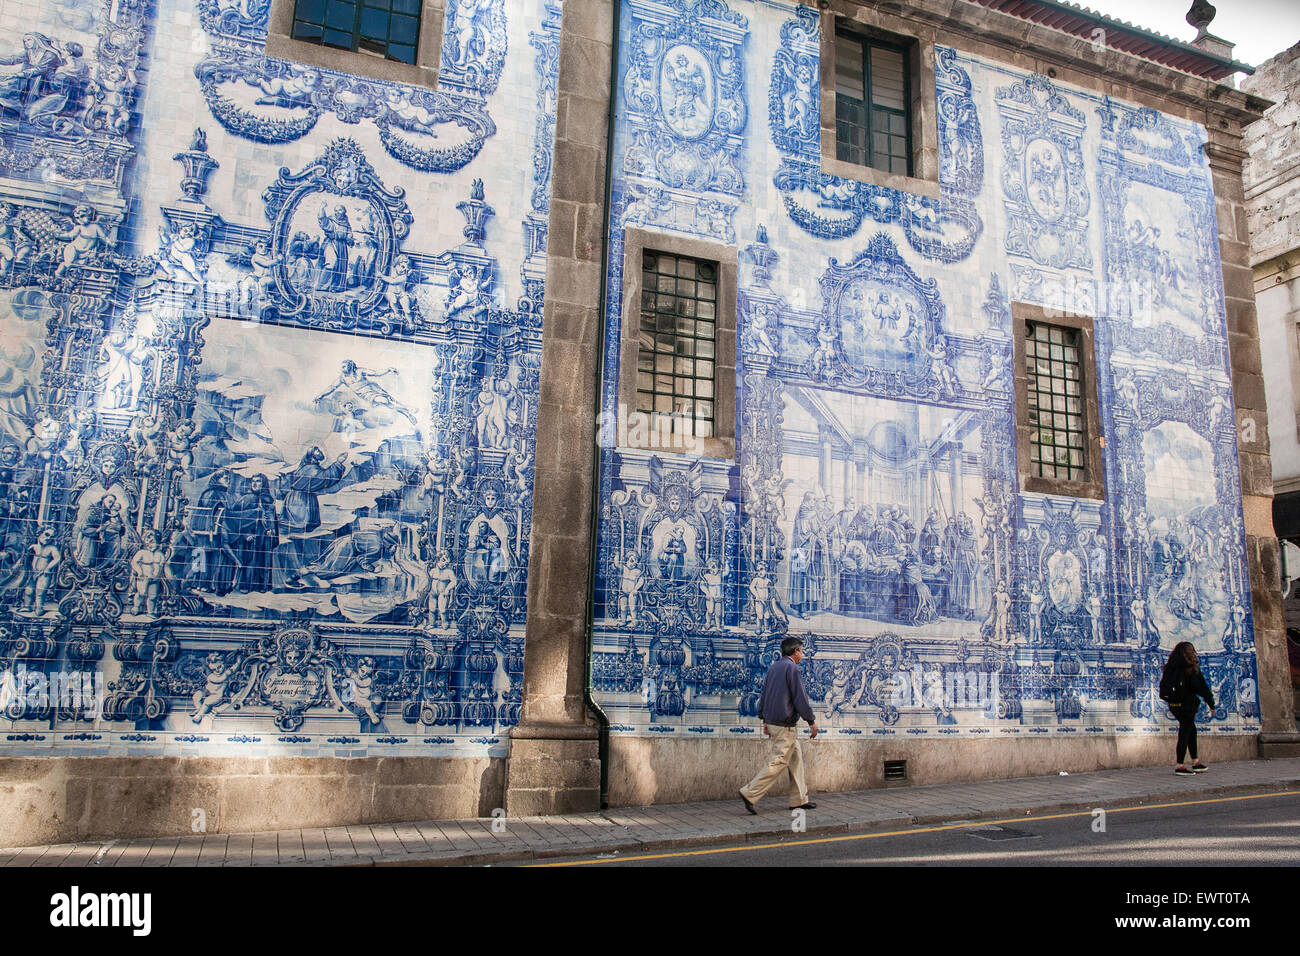 Tiles on wall of church 'Capela Das Almas' in the centre of Porto. Porto, also known as Oporto, is the second largest city in Po Stock Photo